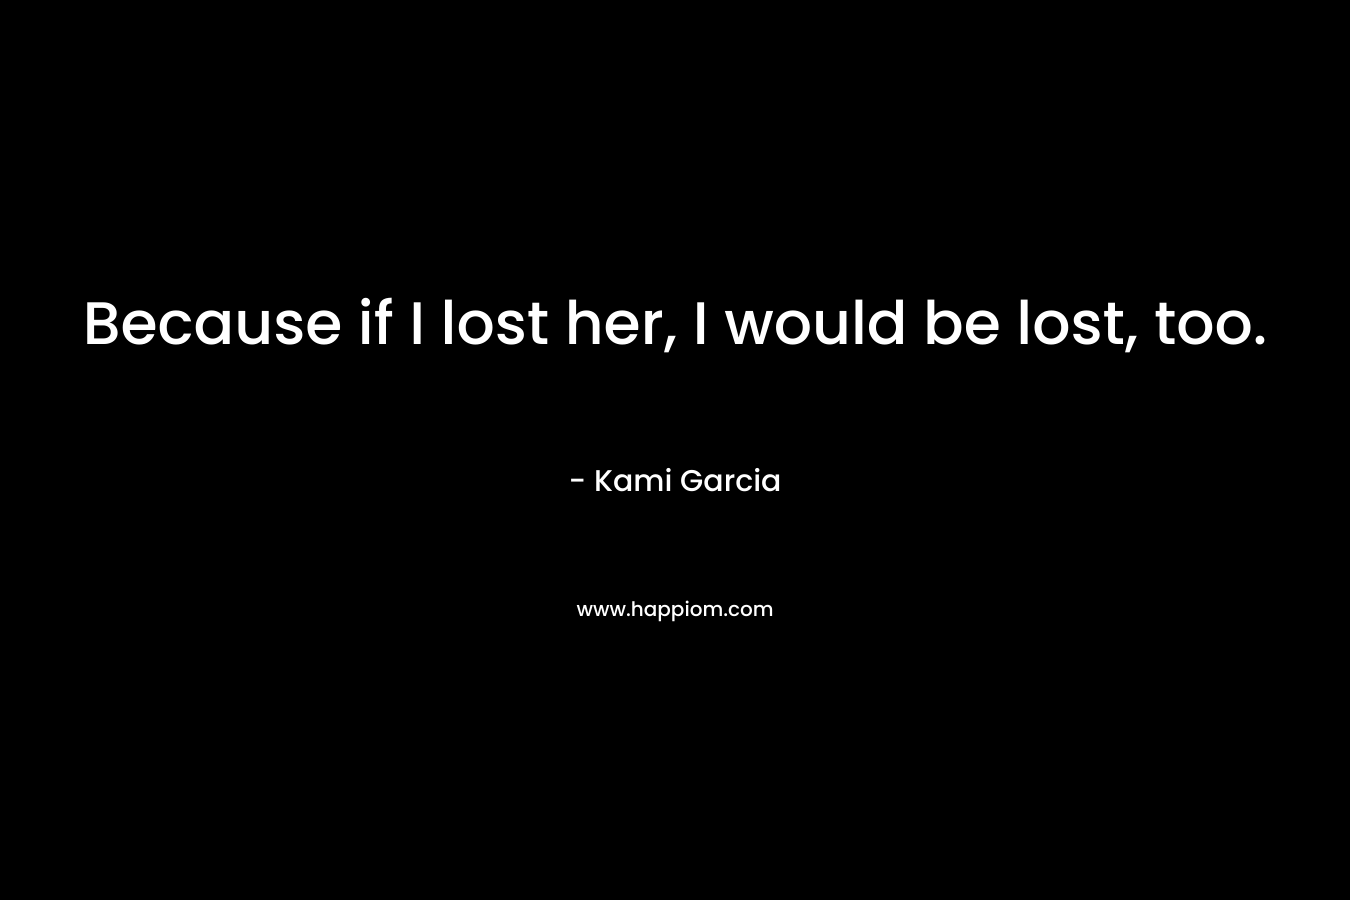 Because if I lost her, I would be lost, too.